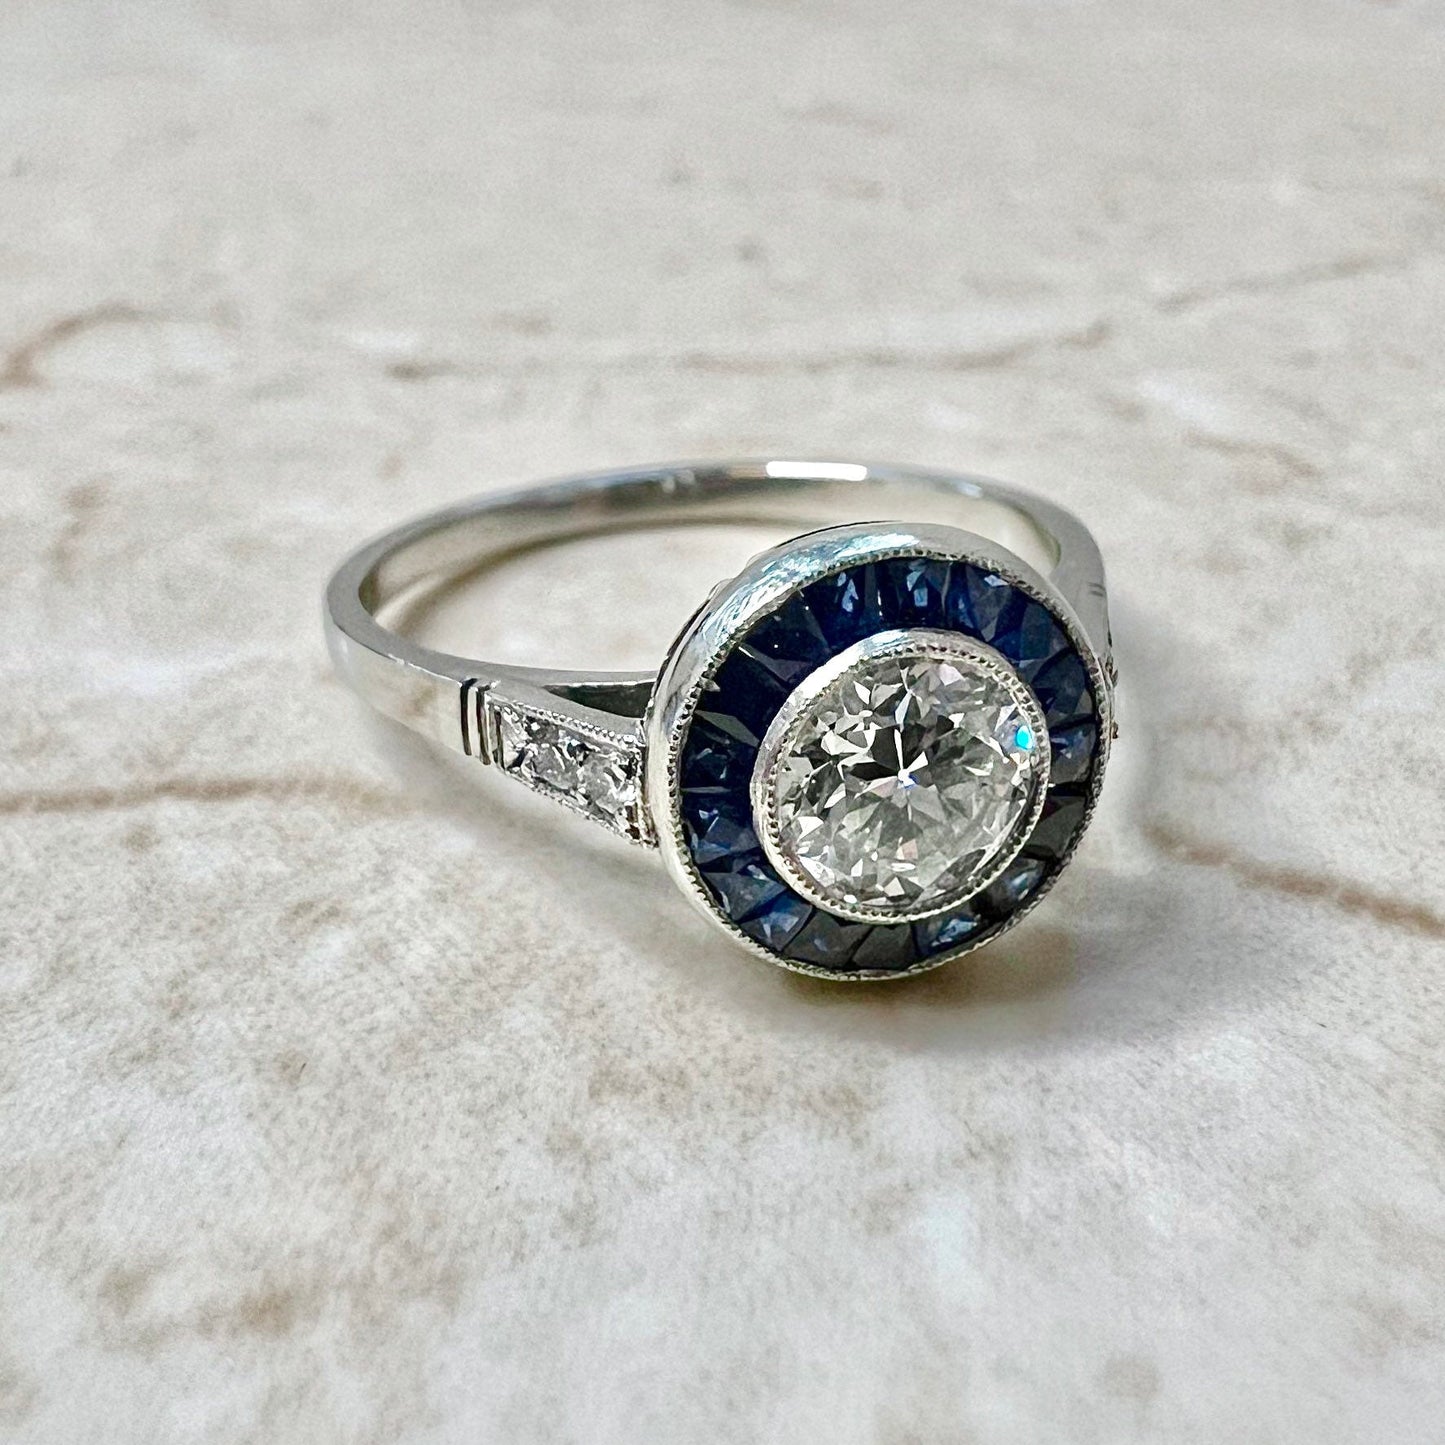 Fine Handcrafted Platinum Art Deco Style Diamond & Sapphire Halo Ring - Diamond Halo Engagement Ring - Promise Ring - Vintage Style Ring